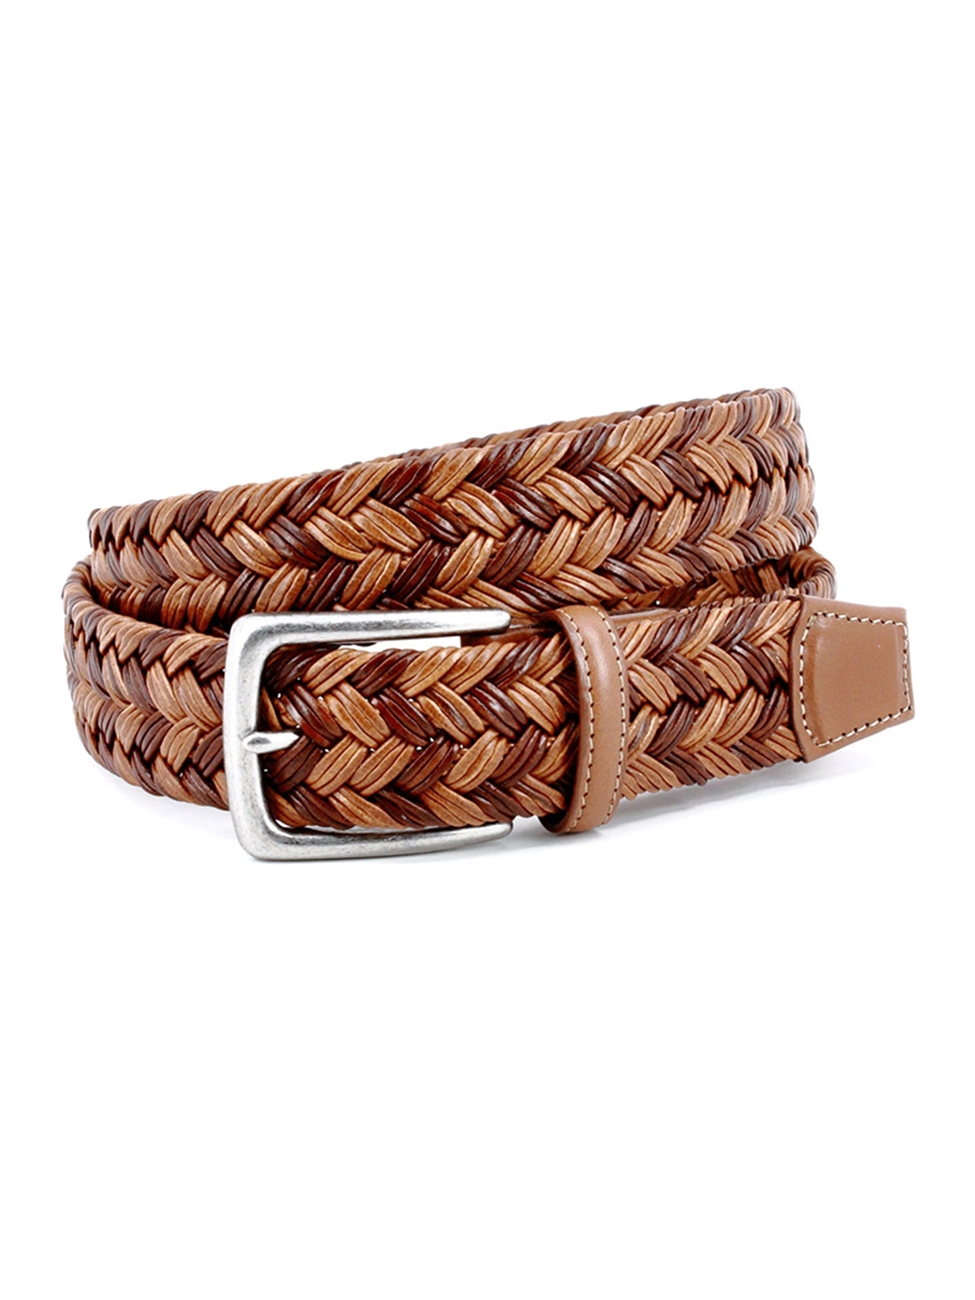 Cognac & Tan Italian Braided Leather Two Tonal Belt, Torino Leather Belts  Collection